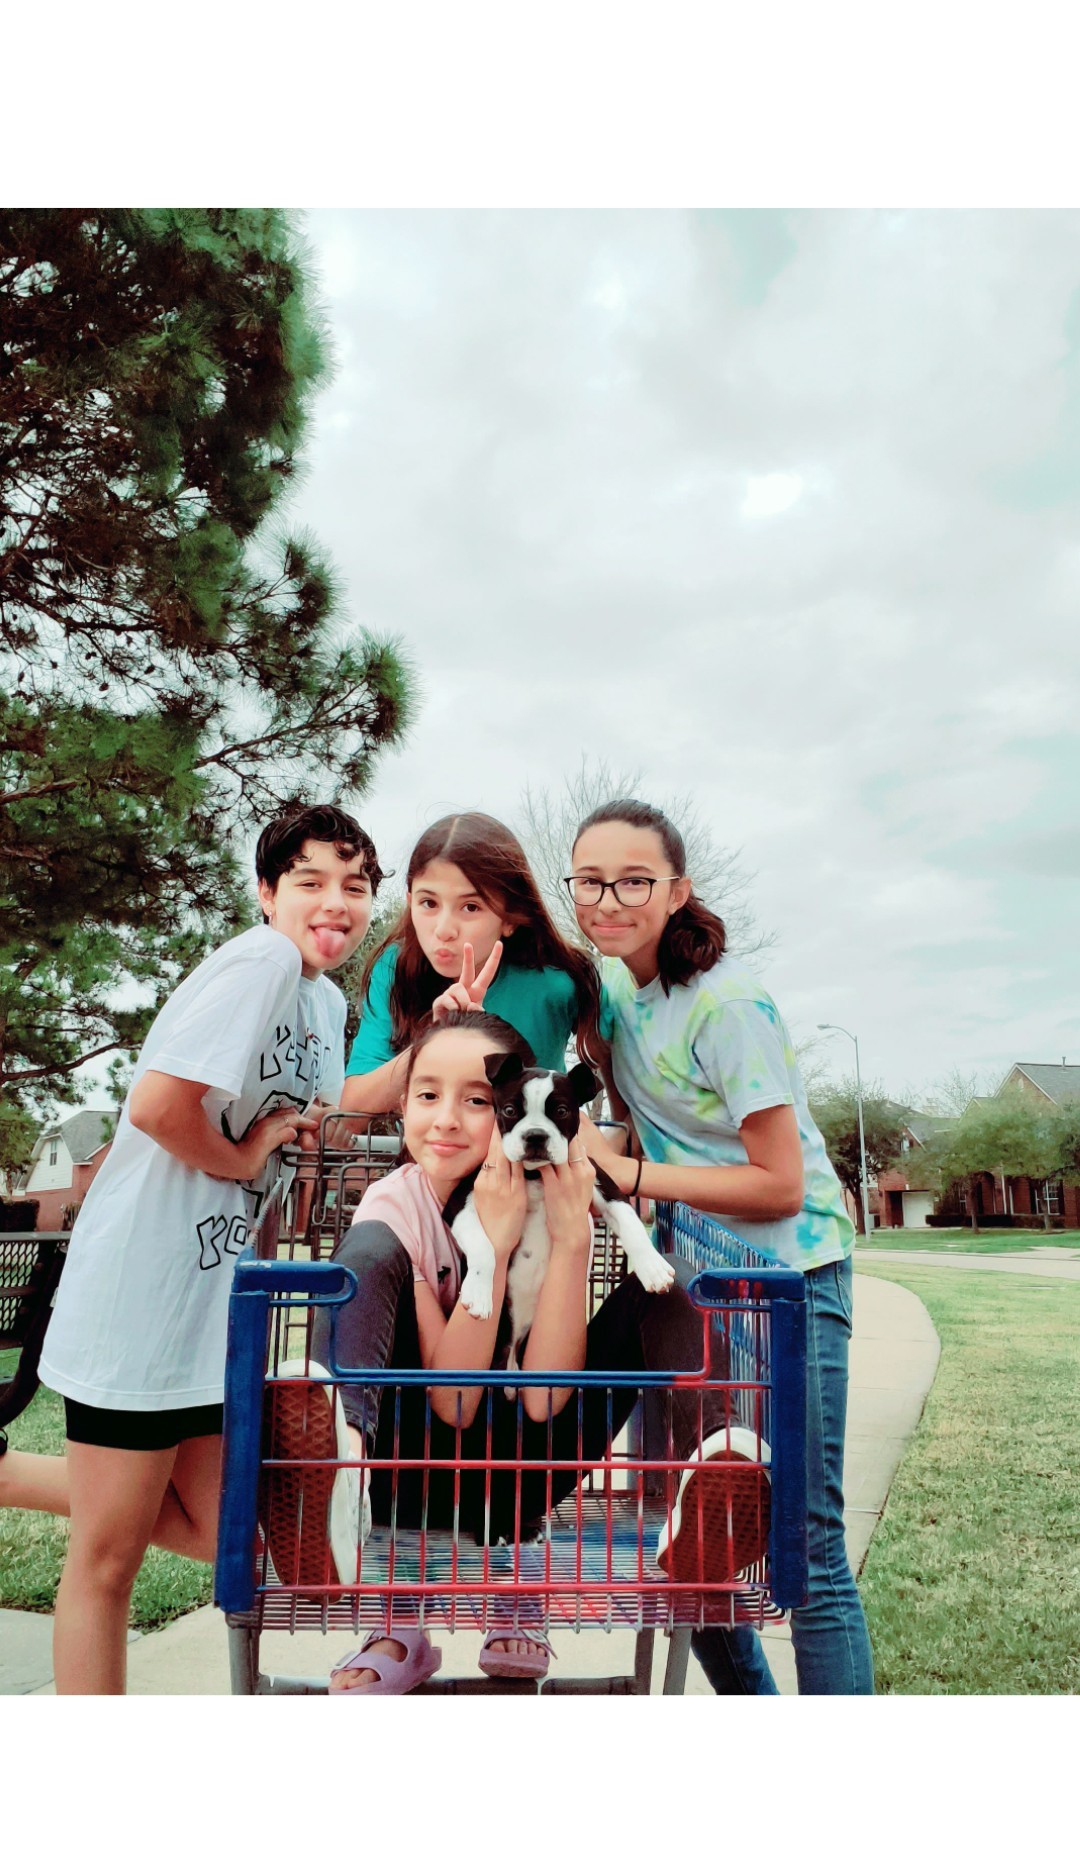 these are my cousins we were taking pictures in the park 💫 this isn't my best pic but its oKkK 😂✋ the girl holding mickey and the girl with the short hair are my cousins 🥺🥺 theyre so pretty i love them so much ♥️